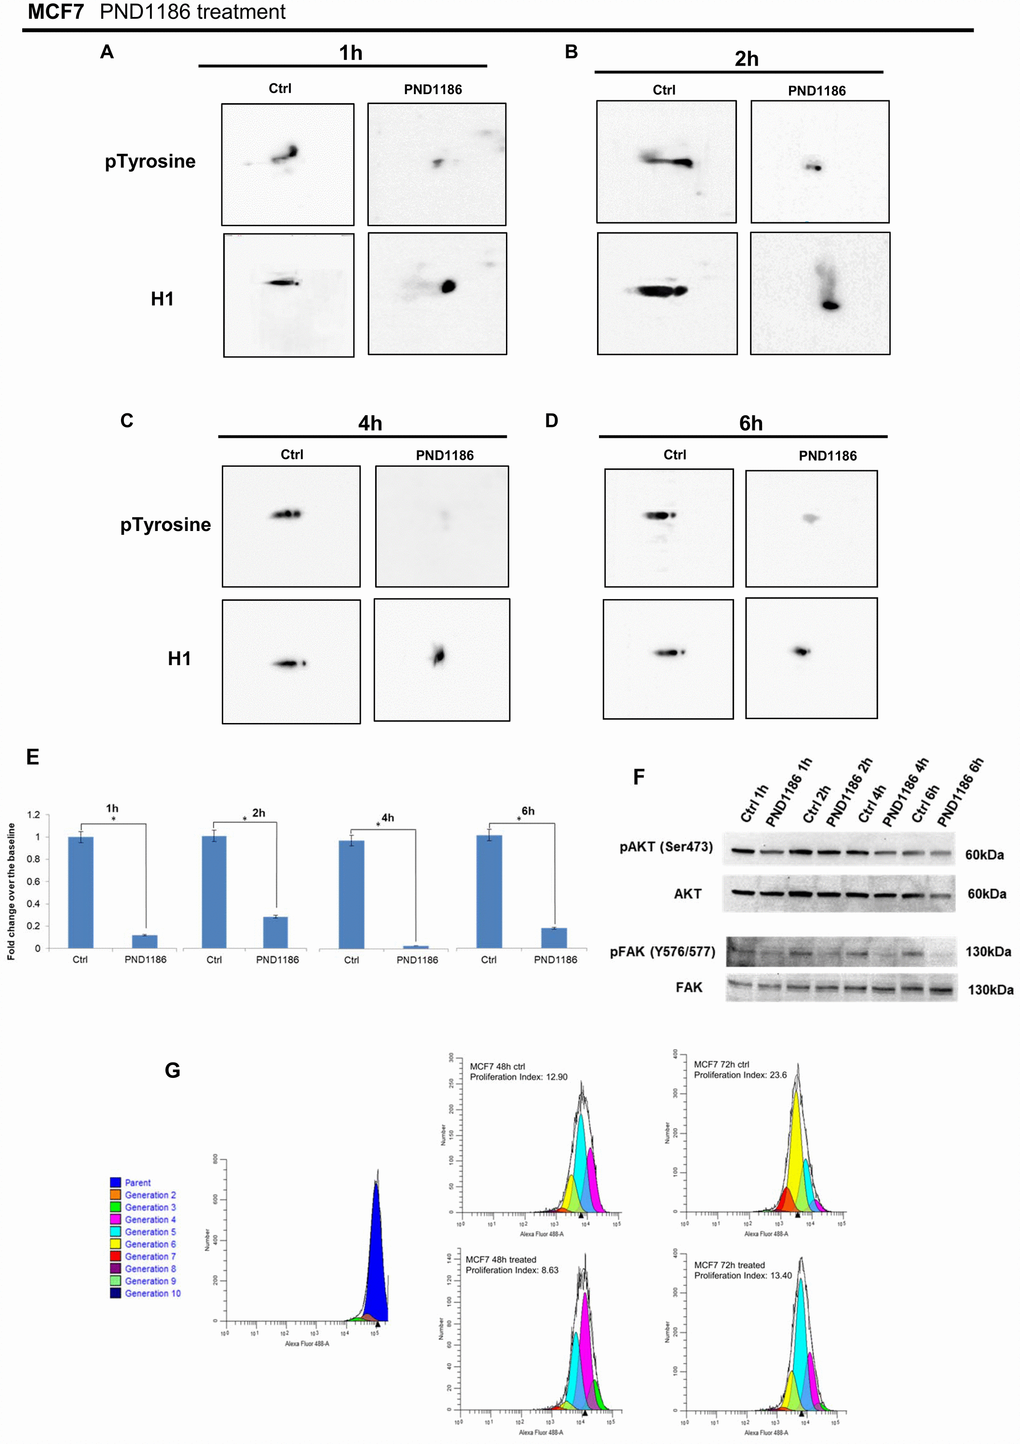 Analysis of H1 histone tyrosine phosphorylation following PND1186 treatments in MCF7 cells. 2D TAU Western blot analysis of histone H1 tyrosine phosphorylation (upper panel) and relative normalization with H1 antibody (lower panel) after PND1186 treatment; a time course of FAK inhibition was done at 1 hour (Panel A), 2 hours (Panel B), 4 hours (Panel C) and 6 hours (Panel D). All WB 2D images were acquired in 4 seconds. (Panel E) Densitometry analysis of H1 tyrosine phosphorylation spots; (panel F) Western blot analysis of pAKT, and pFAK levels in protein extracts from PND1186-treated cells. Phospho-Akt (ser473) and pFAK (Y576/577) signals were normalized against the corresponding total Akt and total FAK respectively. The assays were repeated in three independent biological replicates. Data are expressed as mean ± SEM (N =3), (G) Cells untreated and in presence of PND1186 300nM were cultured for 48 and 72 hours. Proliferation potential was detected, at single cell level, by CellTrace™ CFSE labeling. FACS analysis was performed at T0 (immediately after cell staining to define the parent population) and at 48 and 72 hours. Data were analysed by ModFit LT™ 4.0 software and the proliferation index has been generated for each sample.